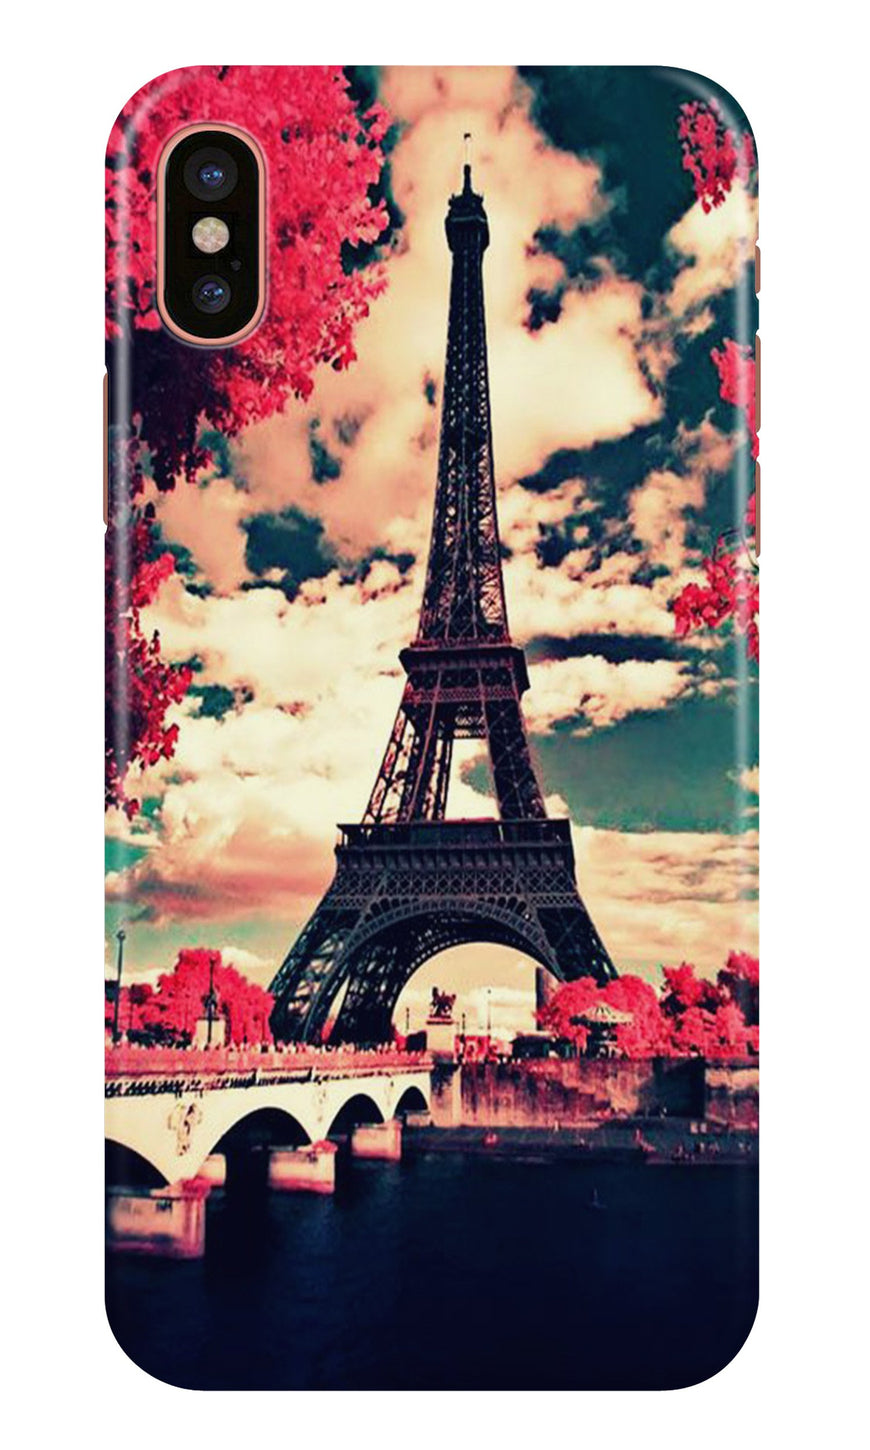 Eiffel Tower Case for iPhone Xr (Design No. 212)